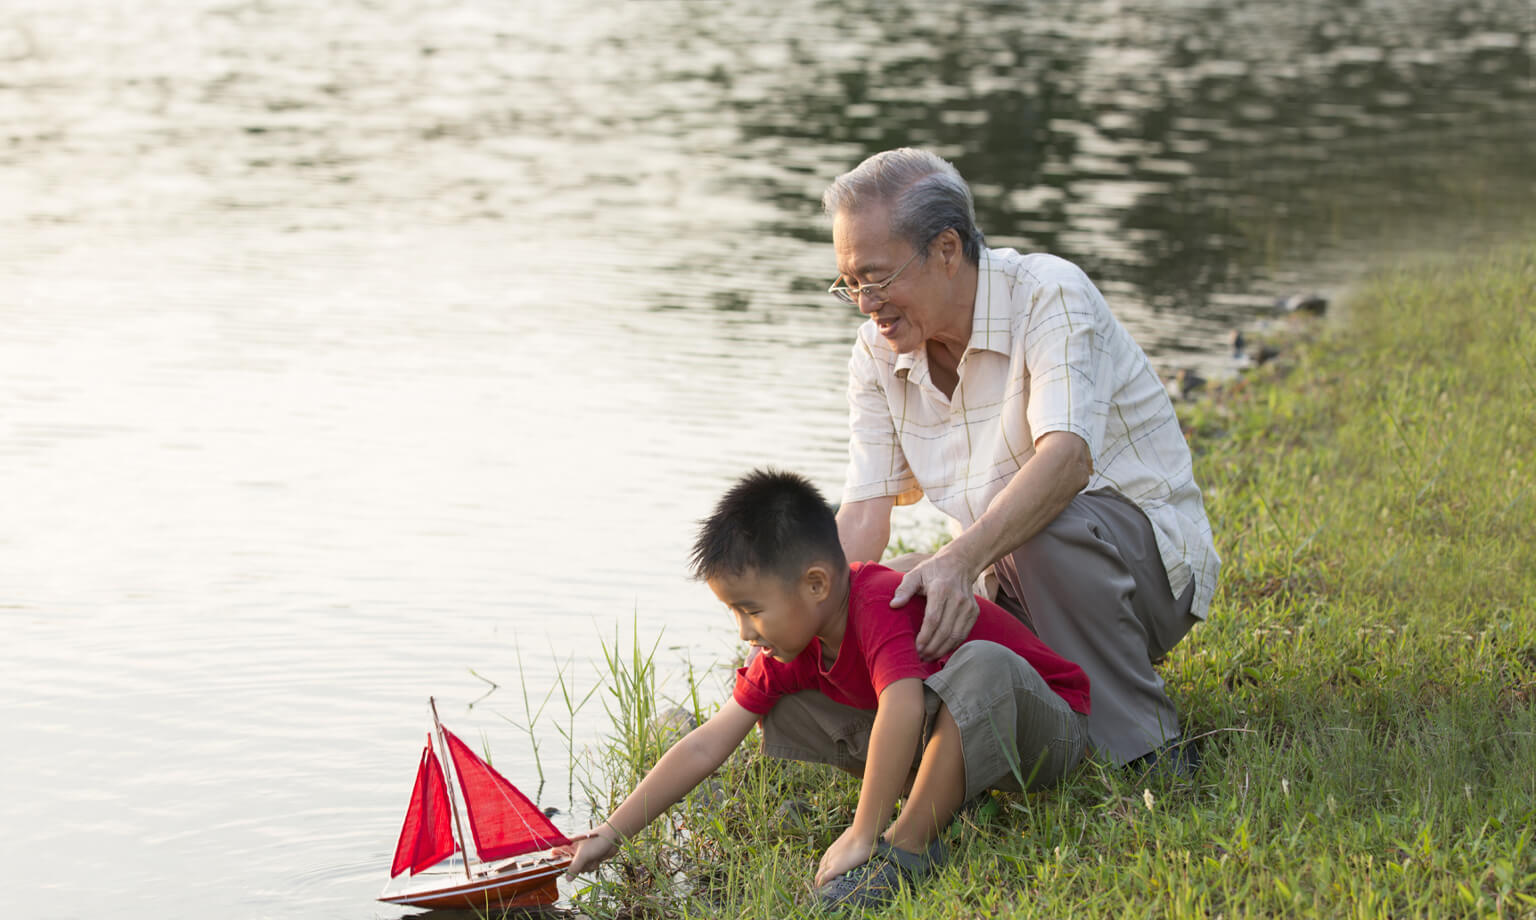 Grandpa with grandson at the lake with toy boat